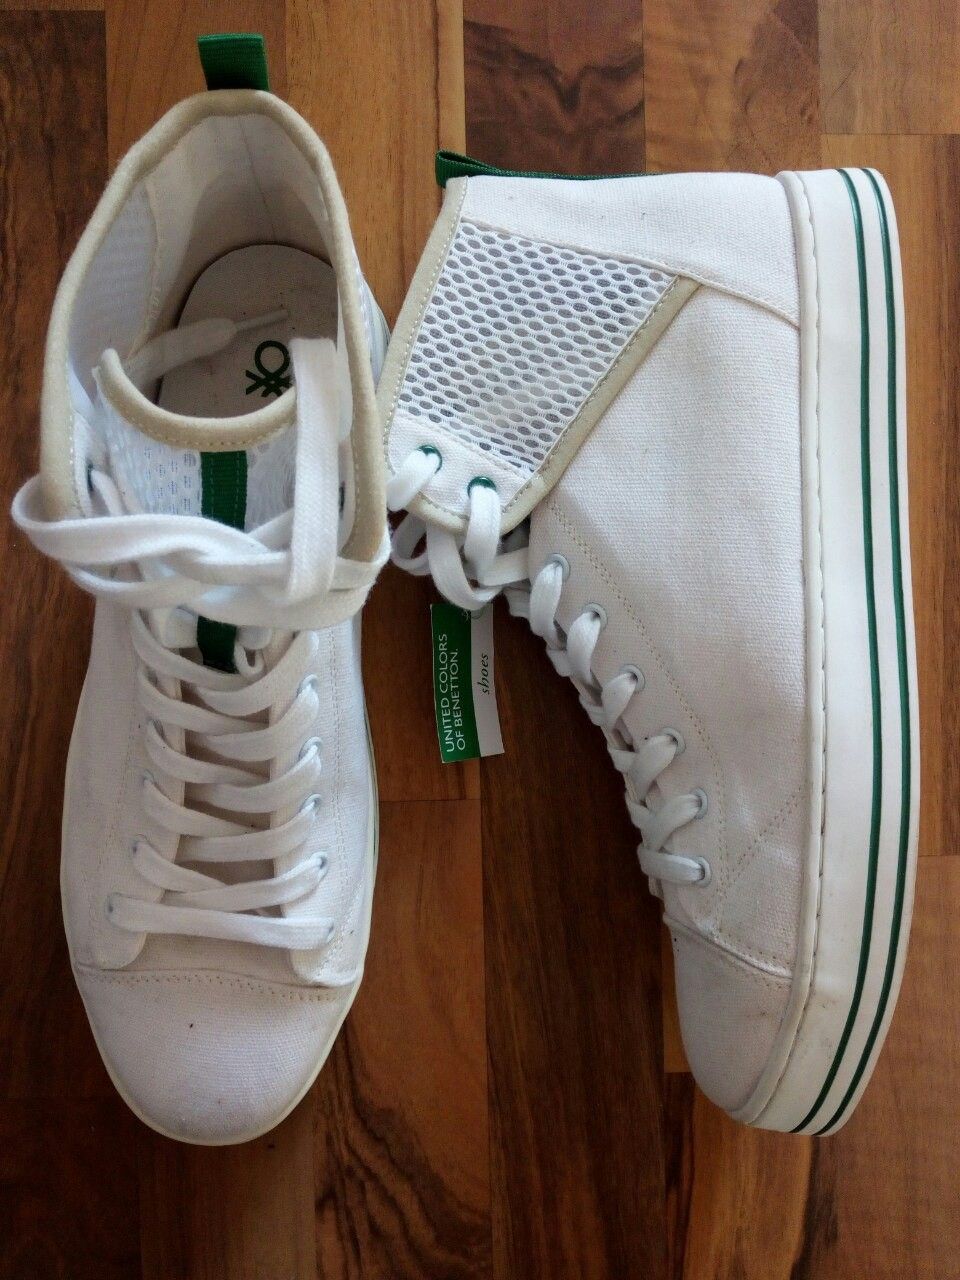 United colors of benetton keds